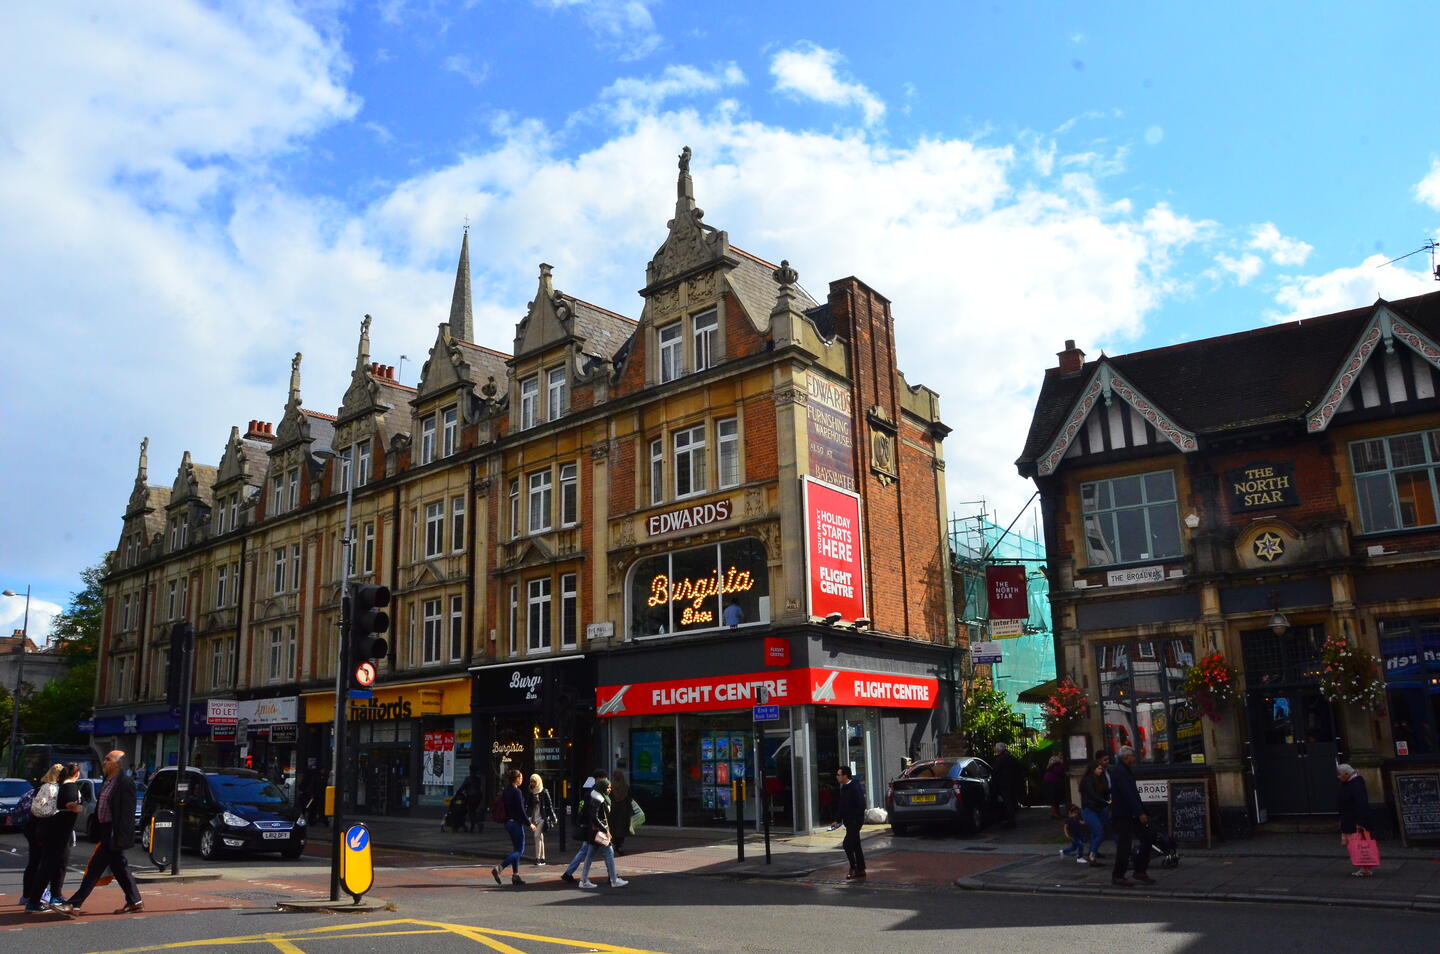 Student Accommodation in Ealing, London - shops and pub on Ealing Broadway